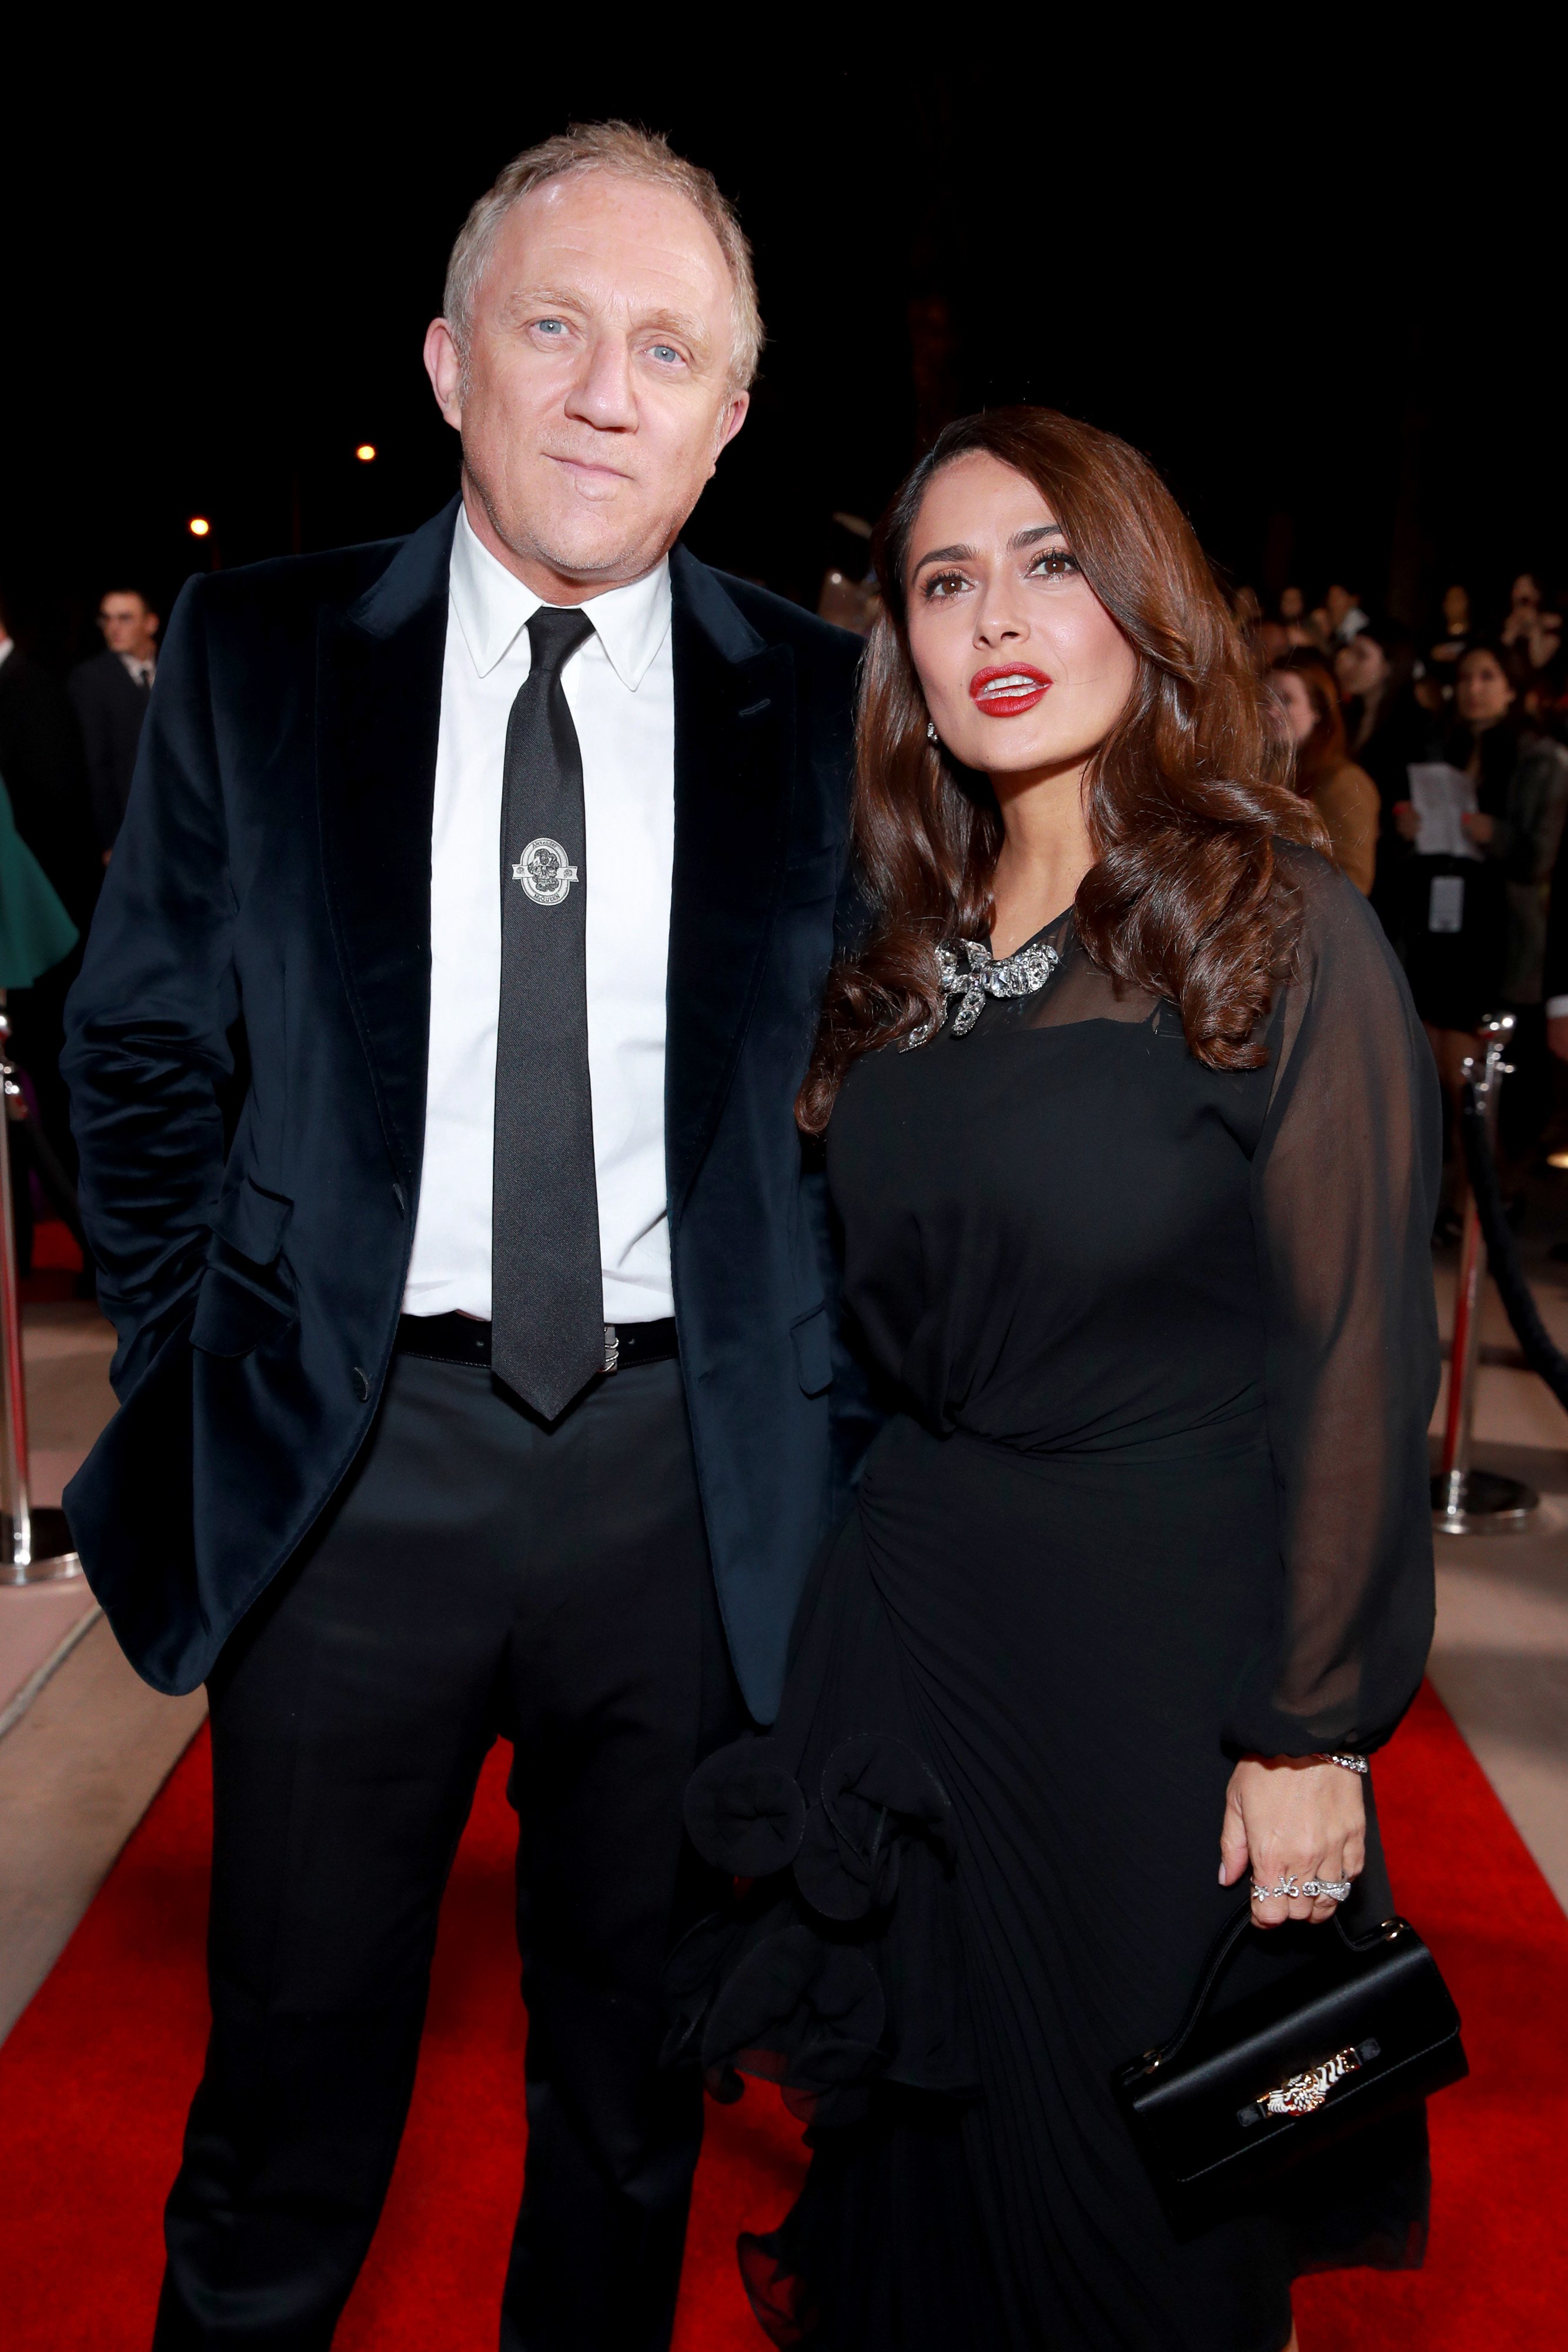 François-Henri Pinault and Salma Hayek attend the 31st Annual Palm Springs International Film Festival Film Awards Gala on January 02, 2020, in Palm Springs, California. | Source: Getty Images.